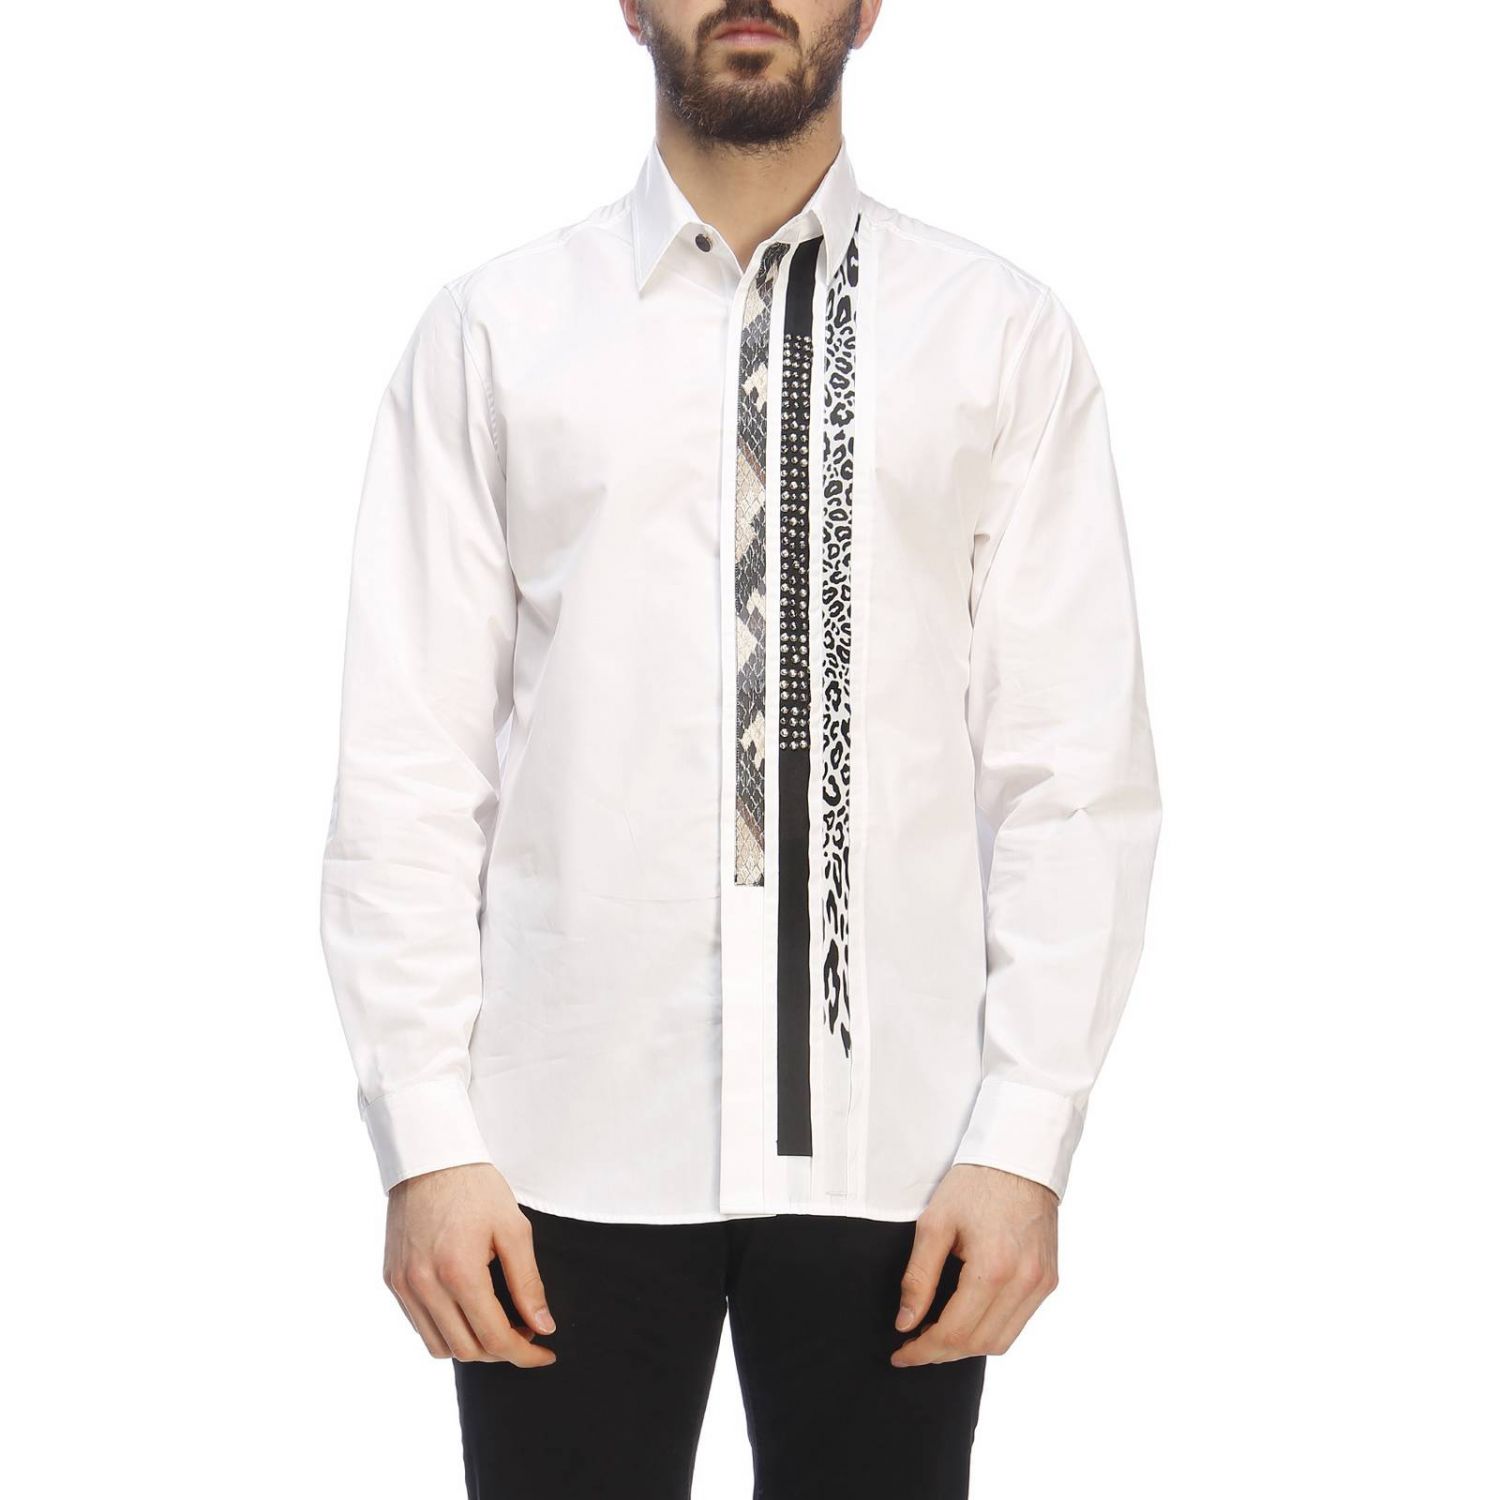 Just Cavalli Outlet: shirt for men - White | Just Cavalli shirt ...